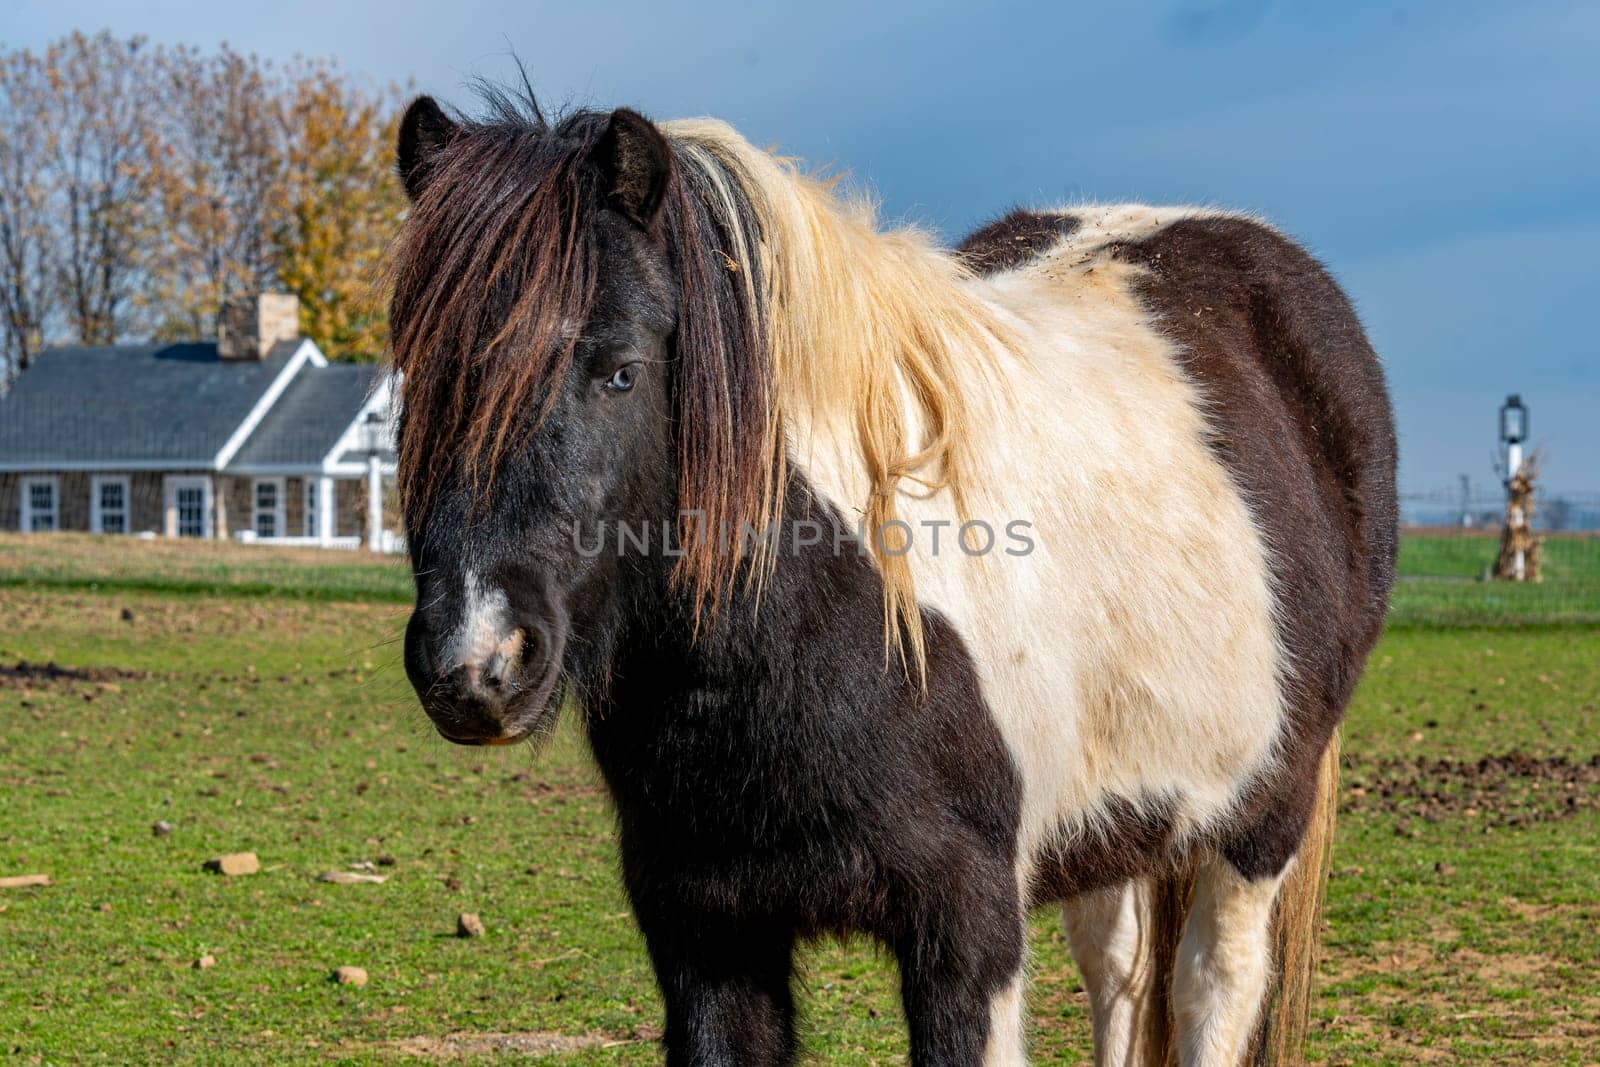 Portrait of a majestic piebald horse, featuring a striking mane of contrasting colors, standing proudly in a rural setting with a classic farmhouse in the background.